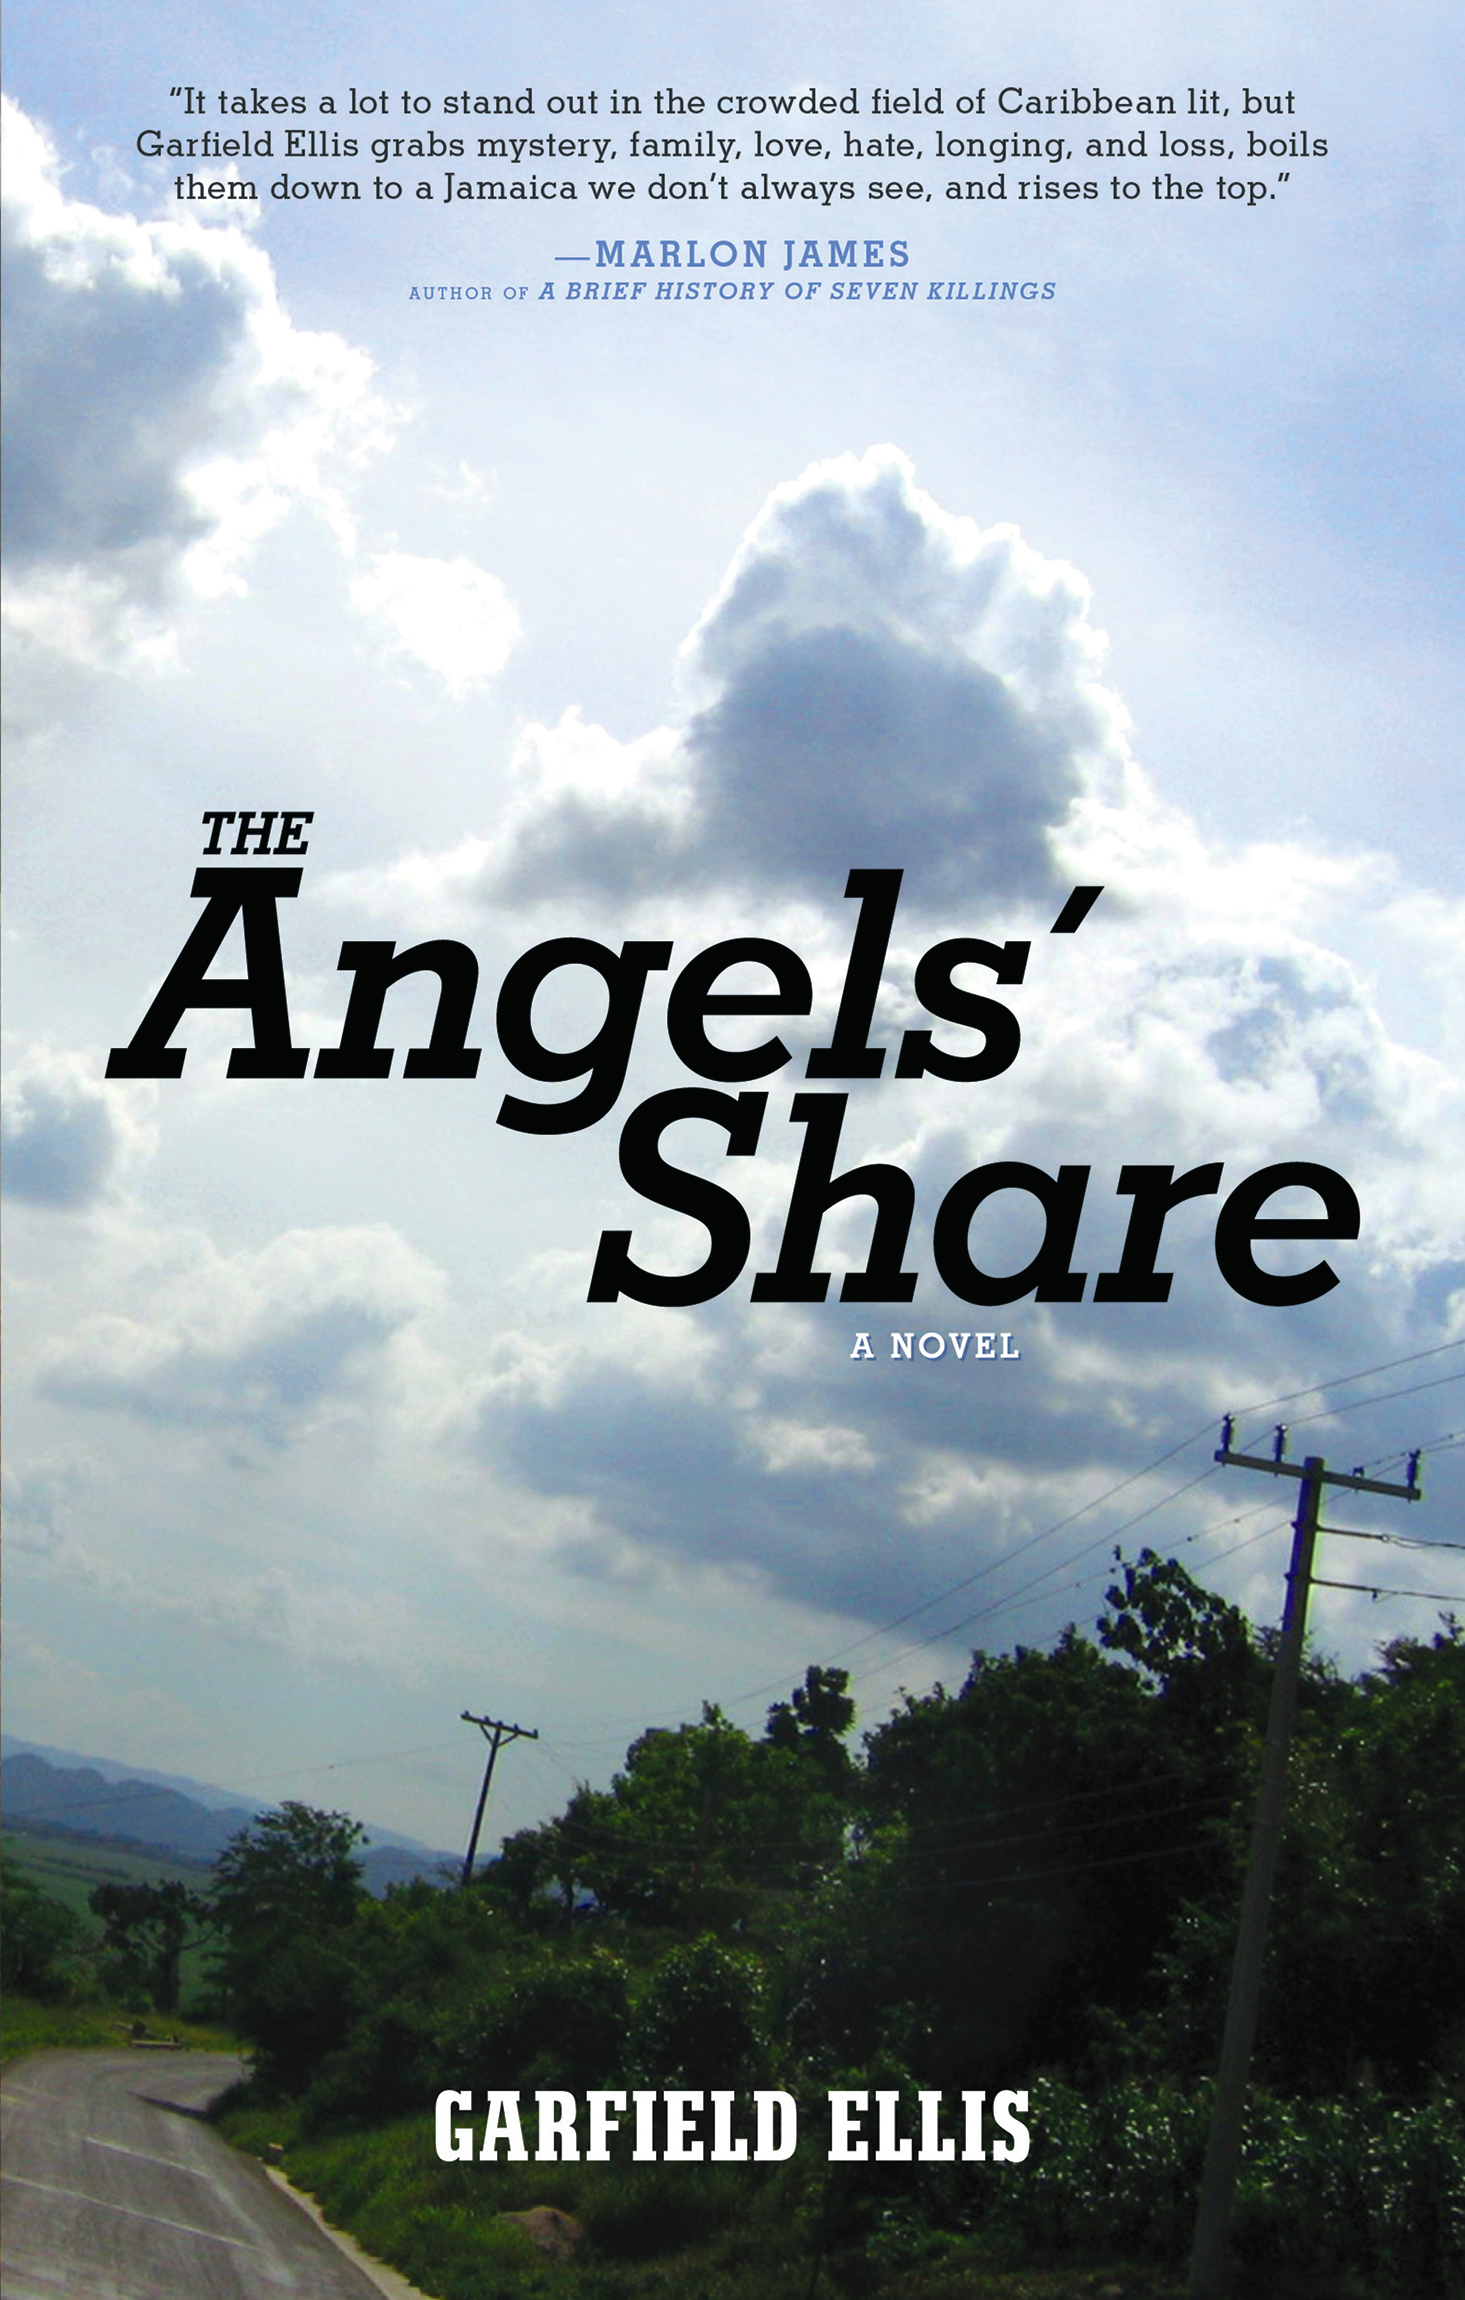 The Angels' Share by Garfield Ellis